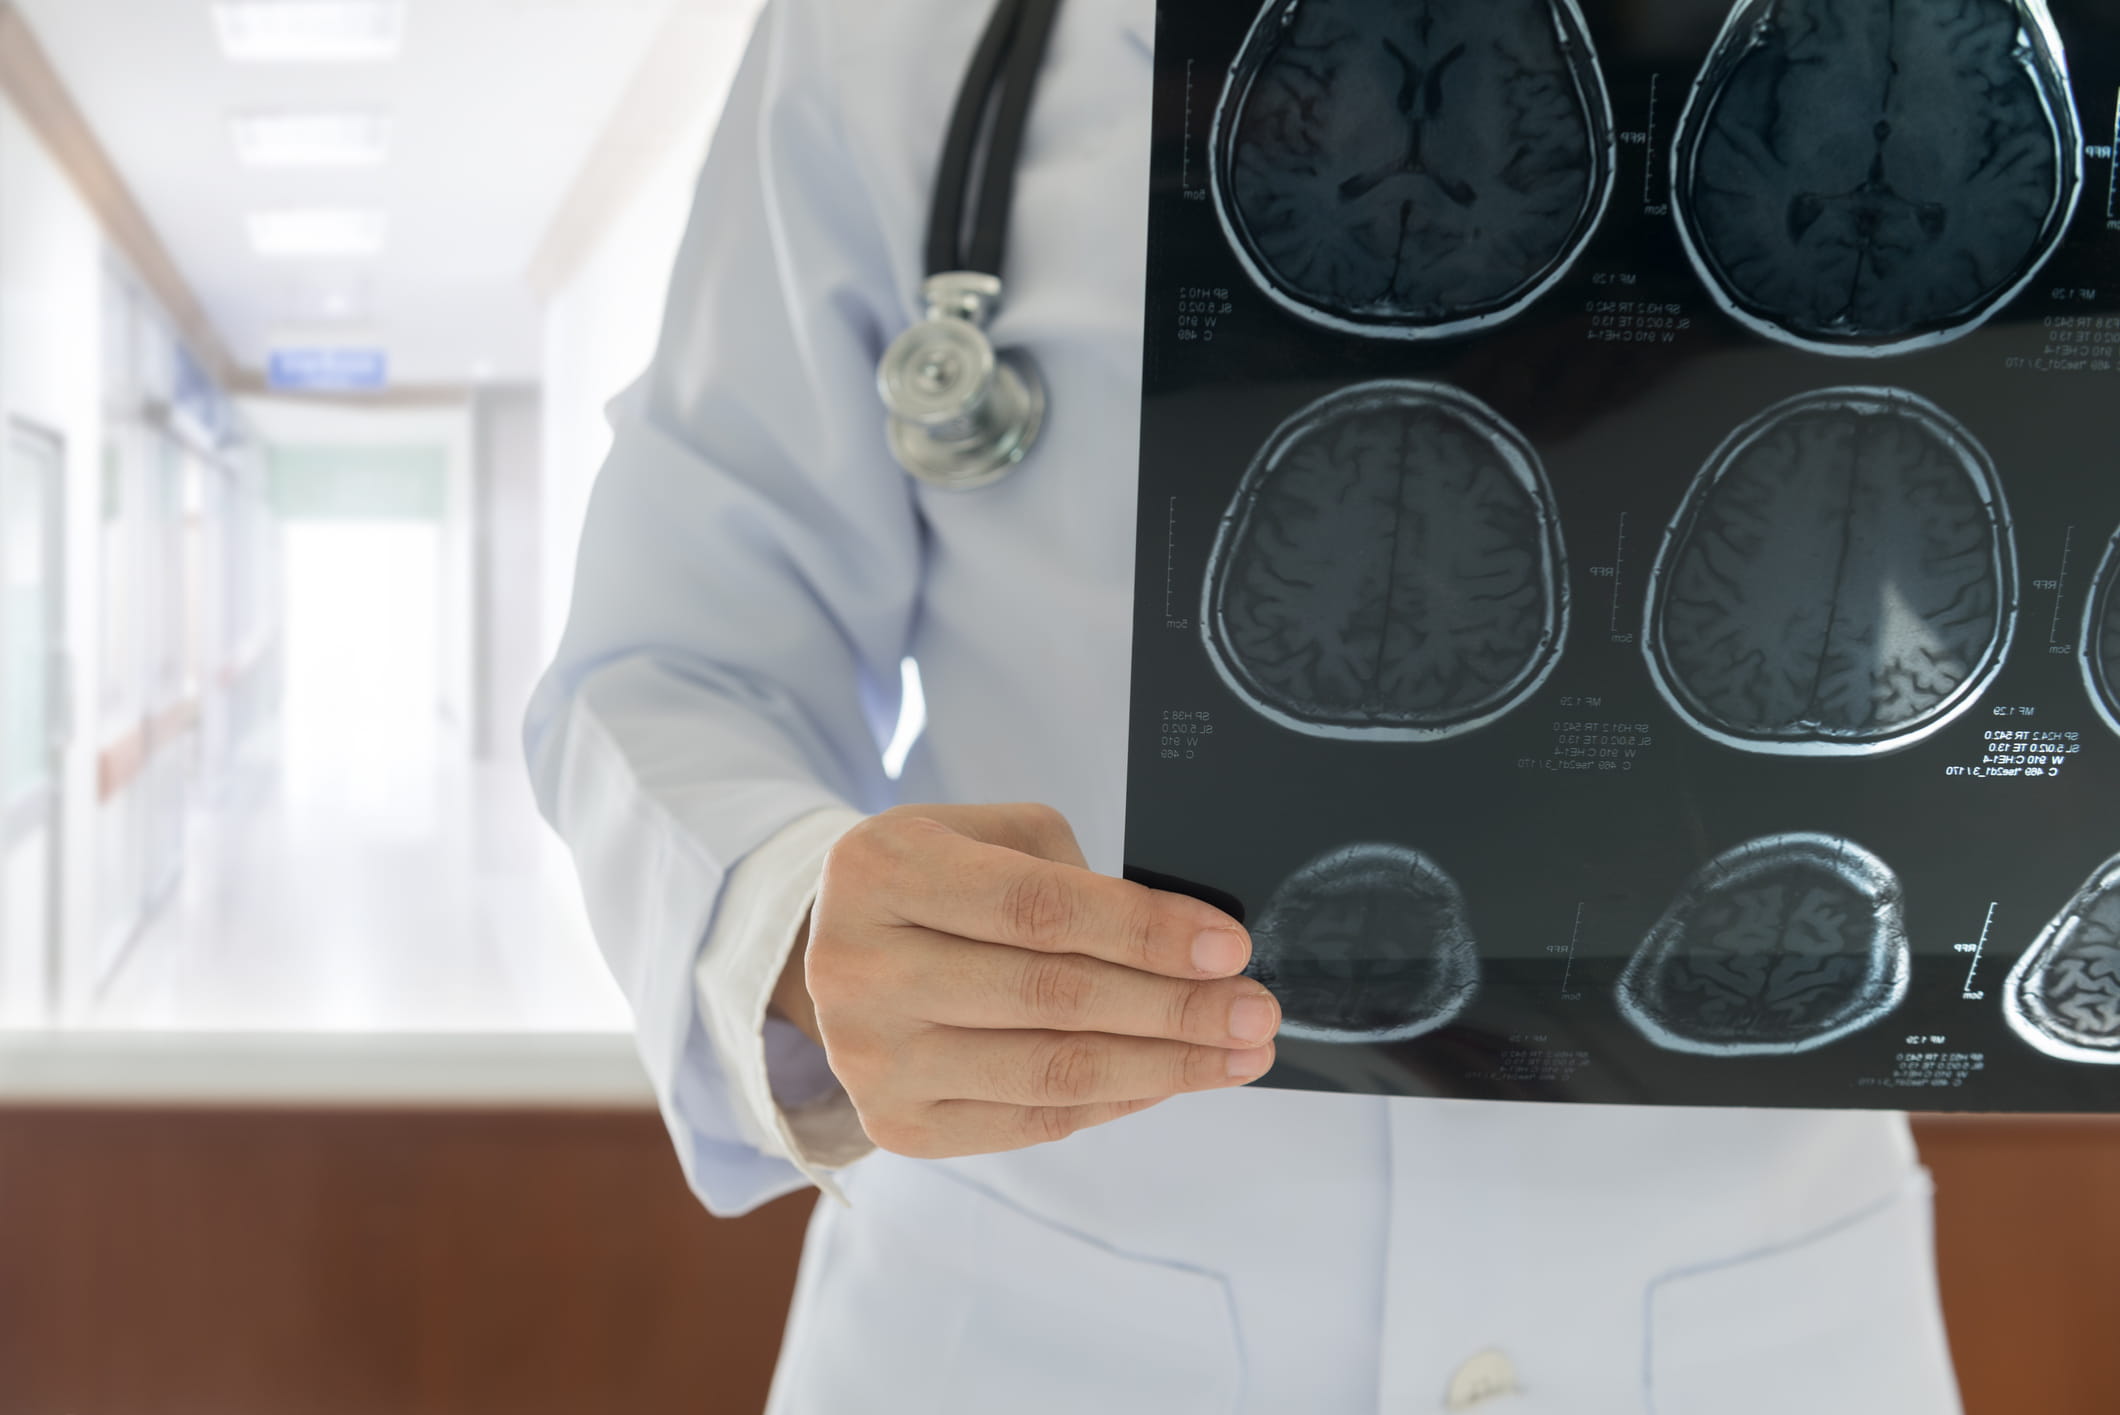 Doctor wearing white coat examines brain images on an X-ray